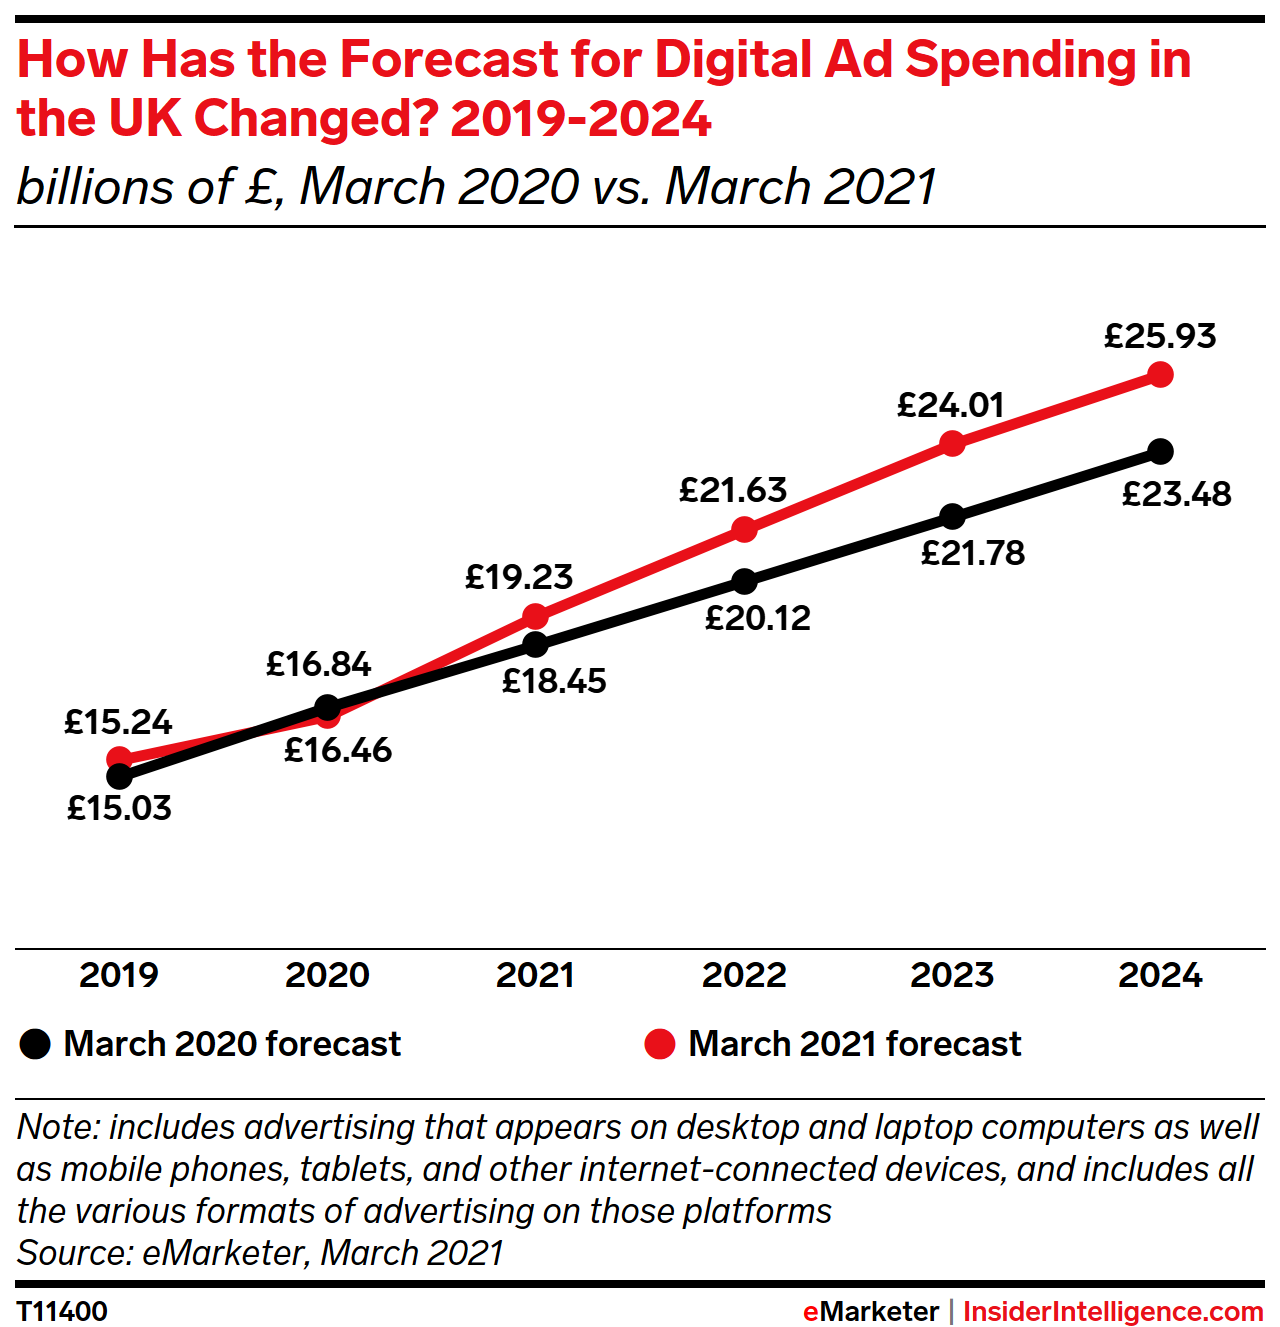 How has our forecast for digital ad spending in the UK changed? 2019-2024 (billions of £)